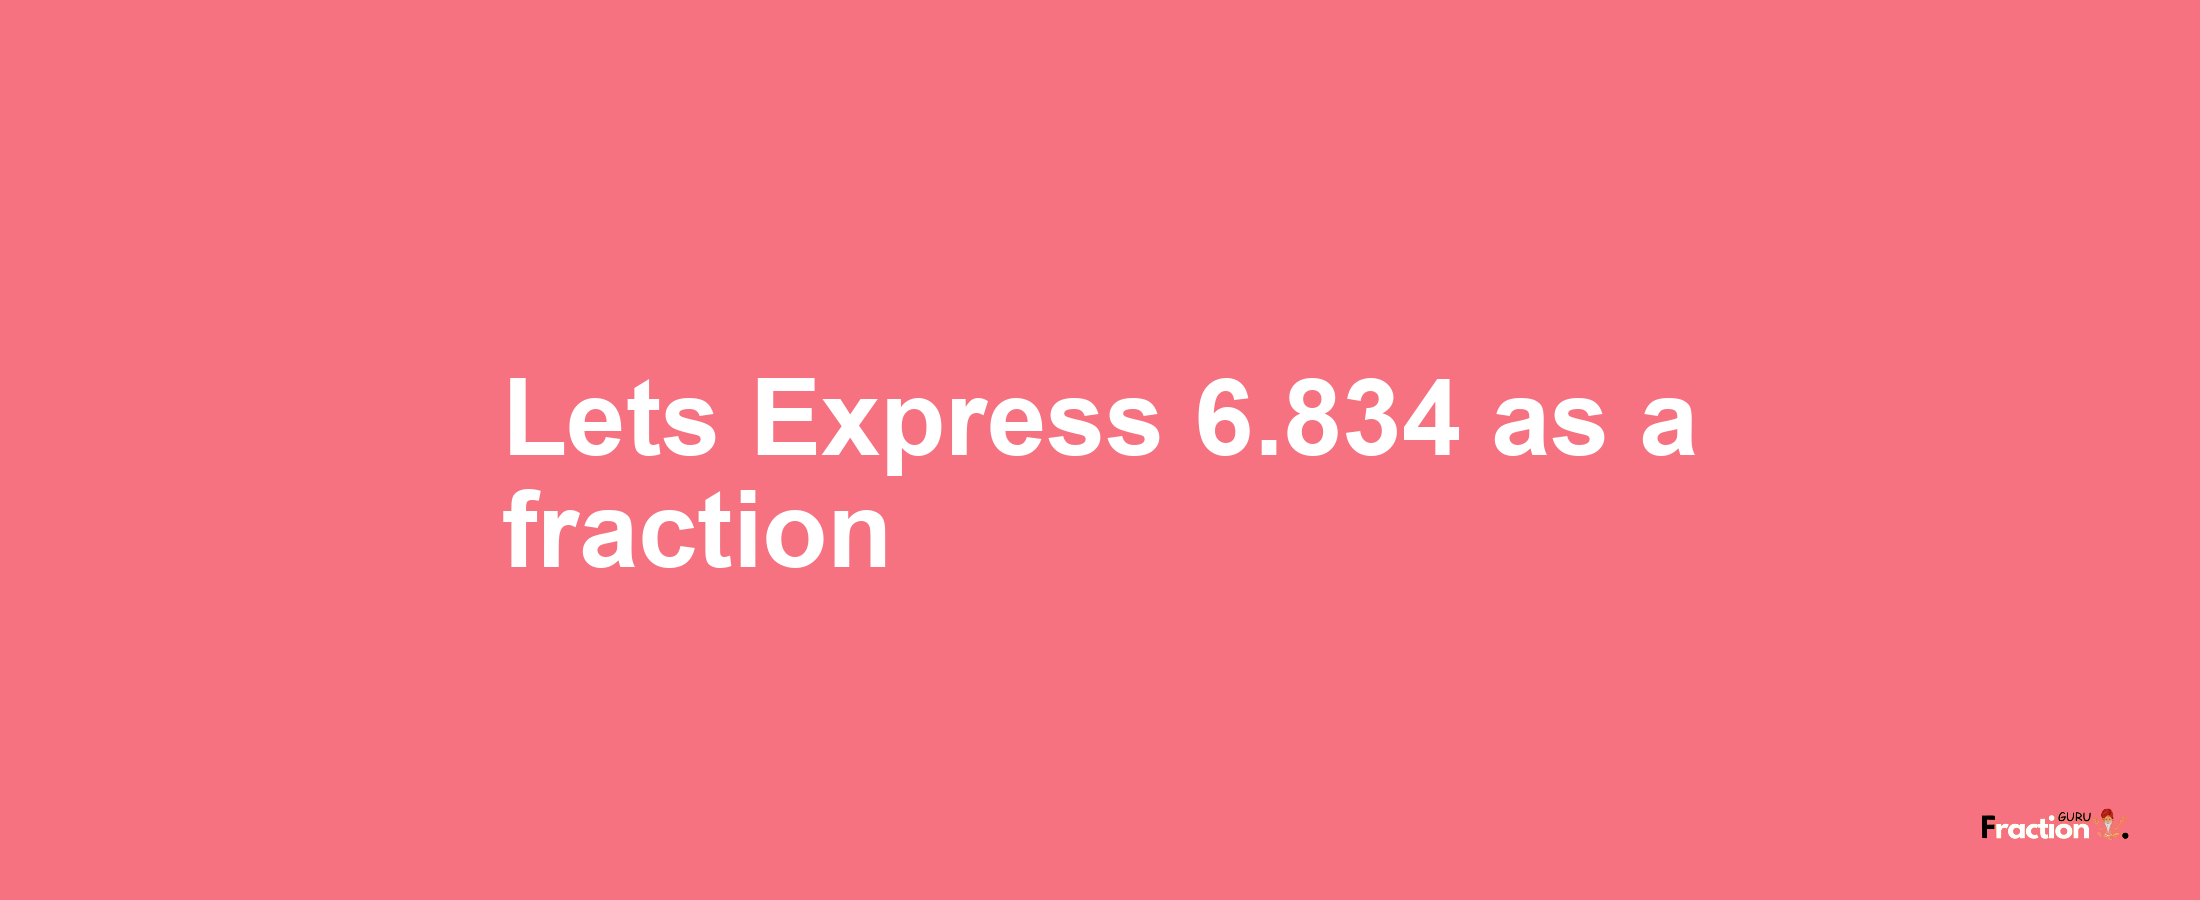 Lets Express 6.834 as afraction